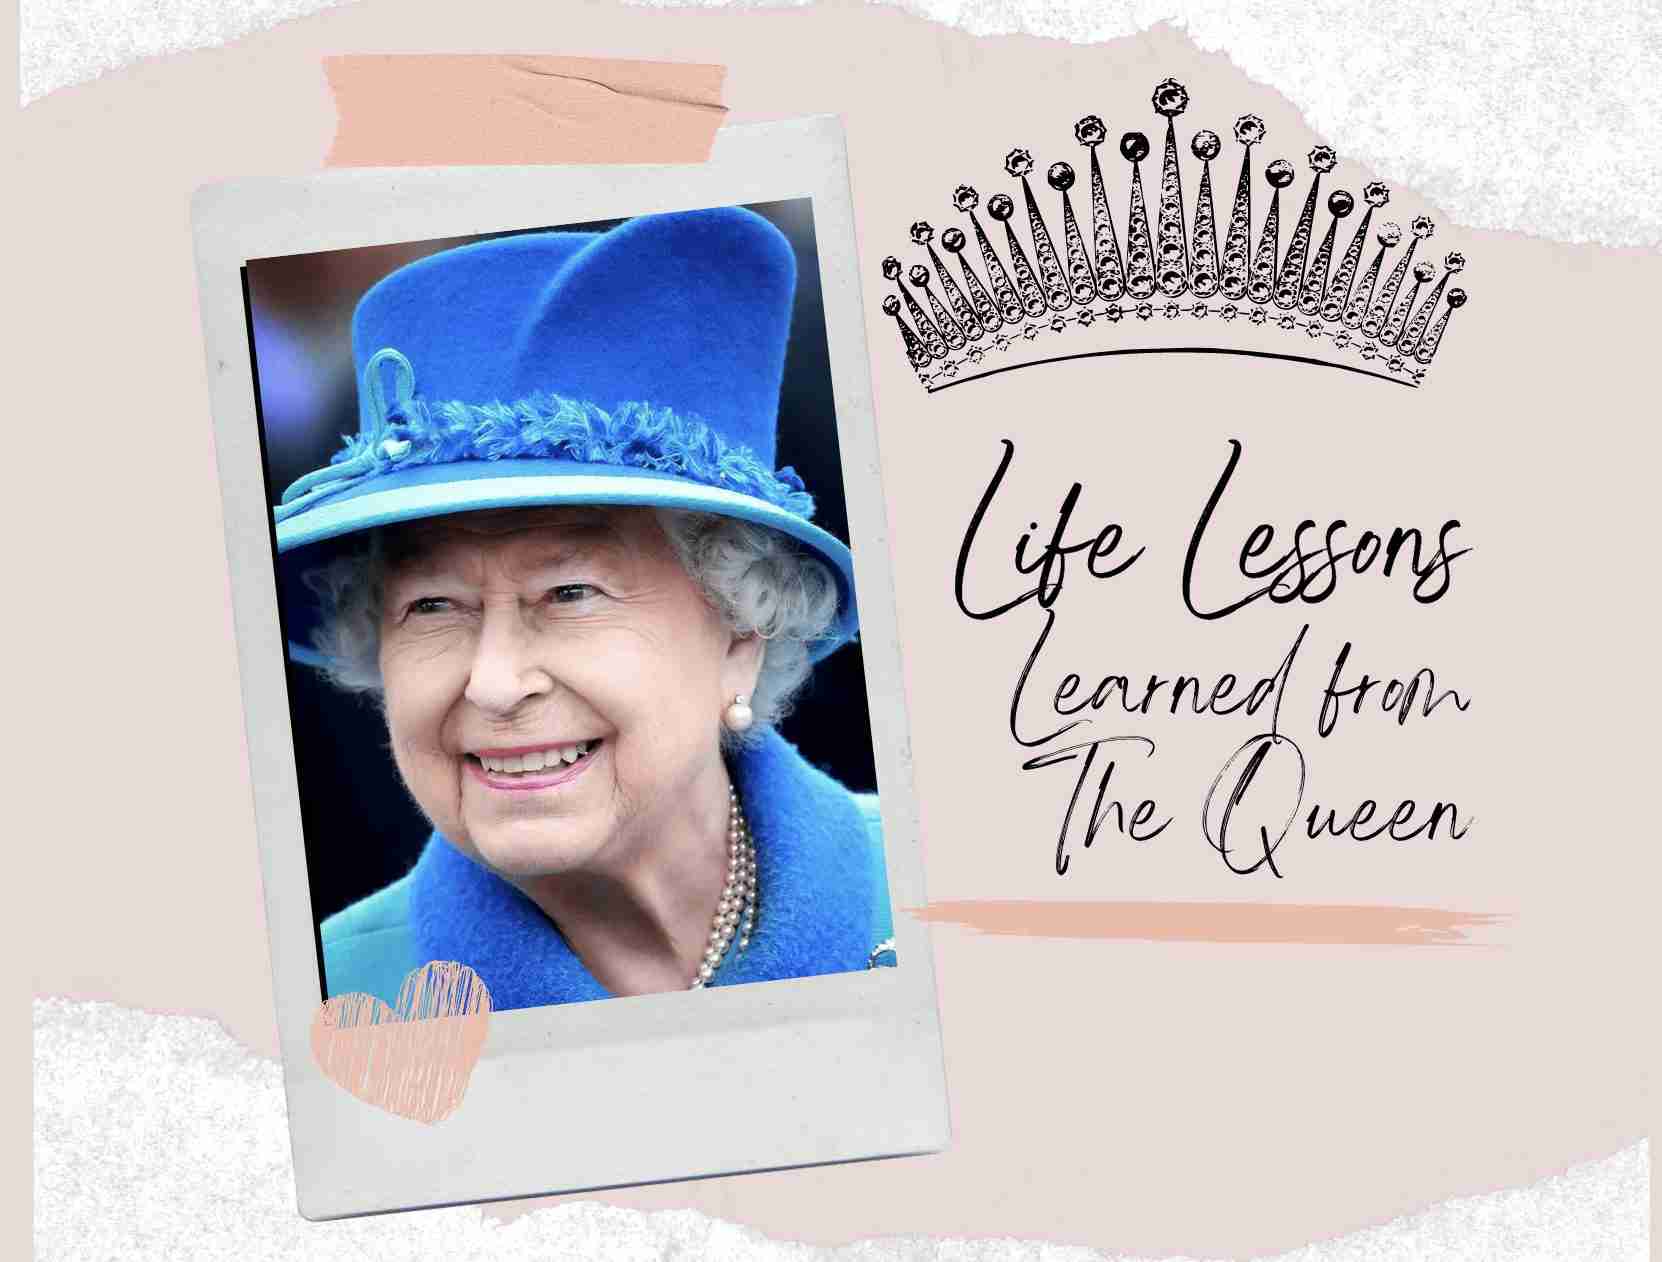 Lessons learned from the Queen